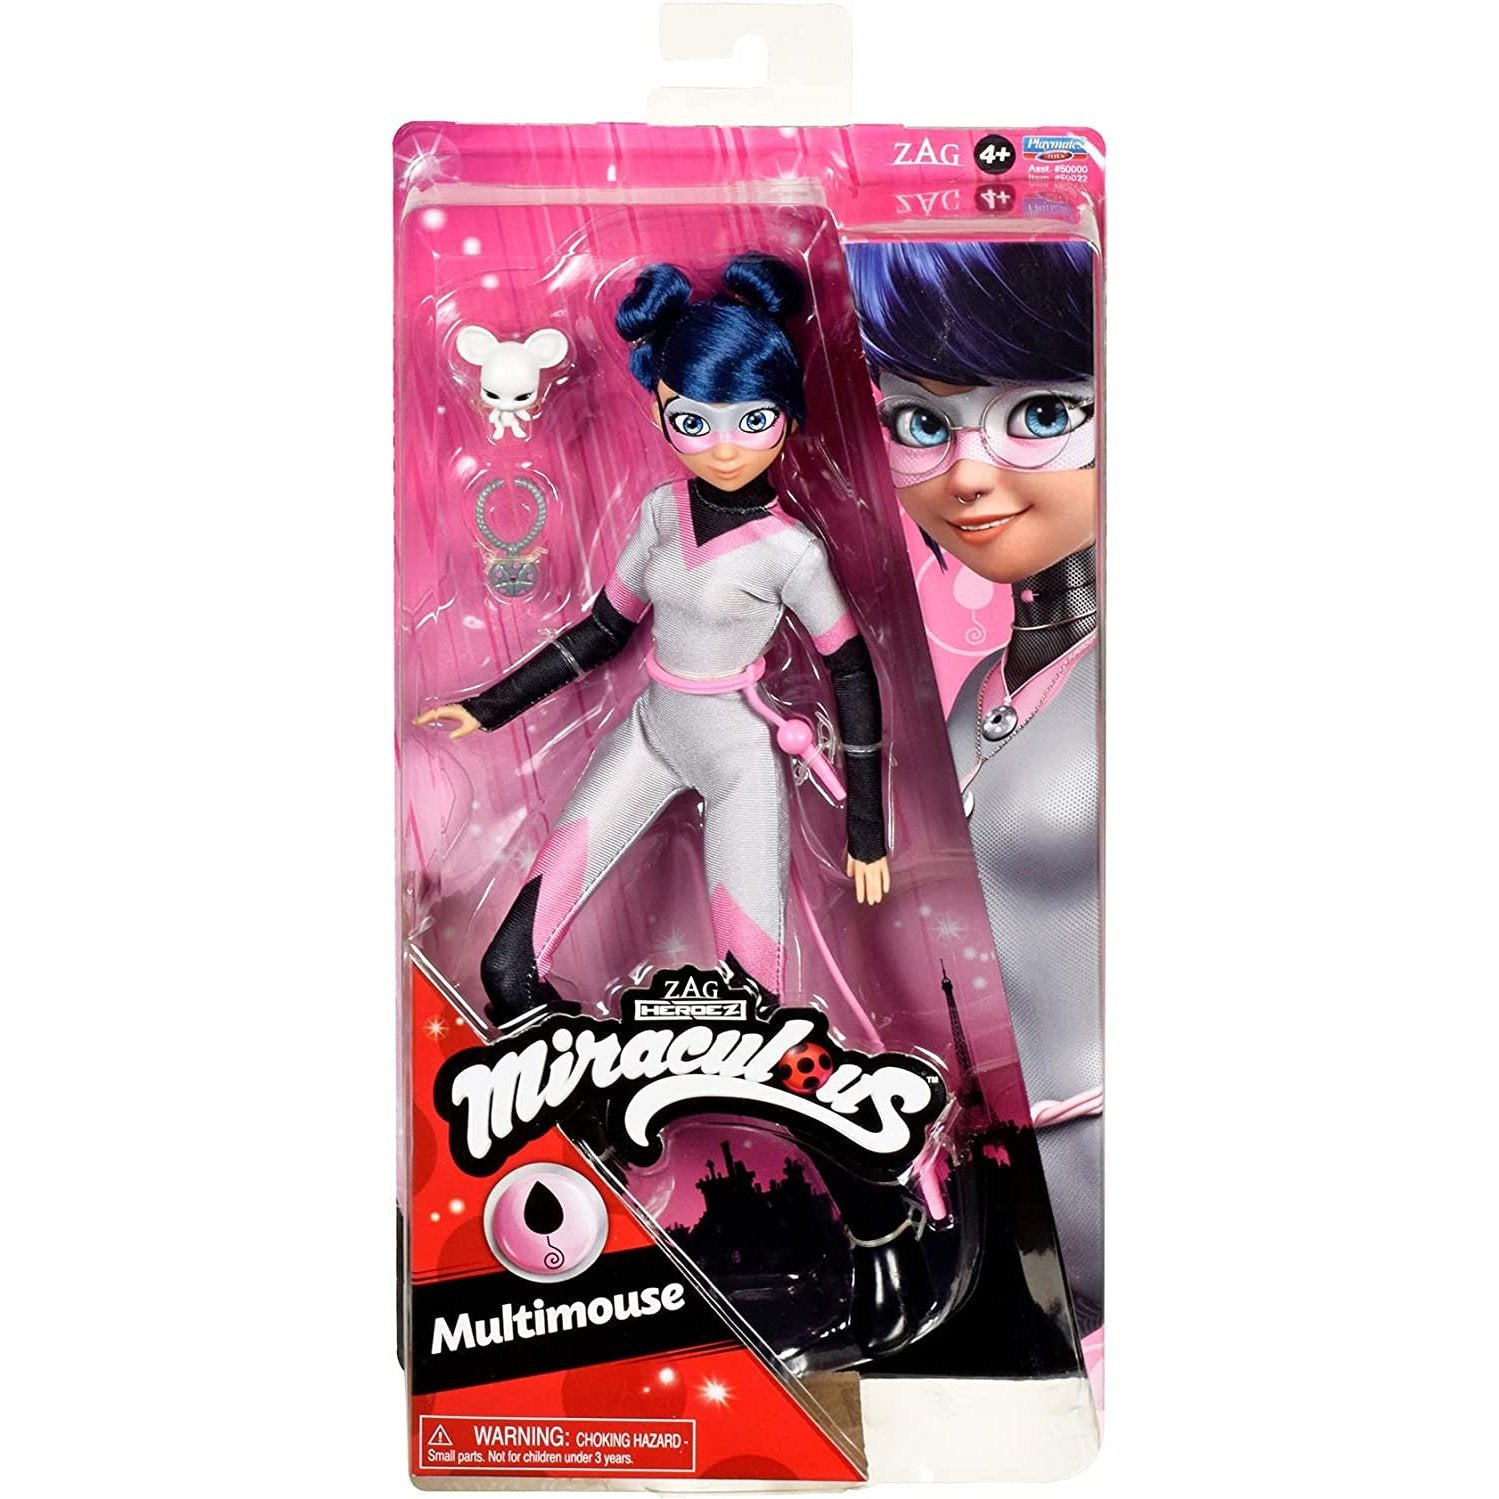 Miraculous Ladybug and Cat Noir Toys Multimouse Fashion Doll